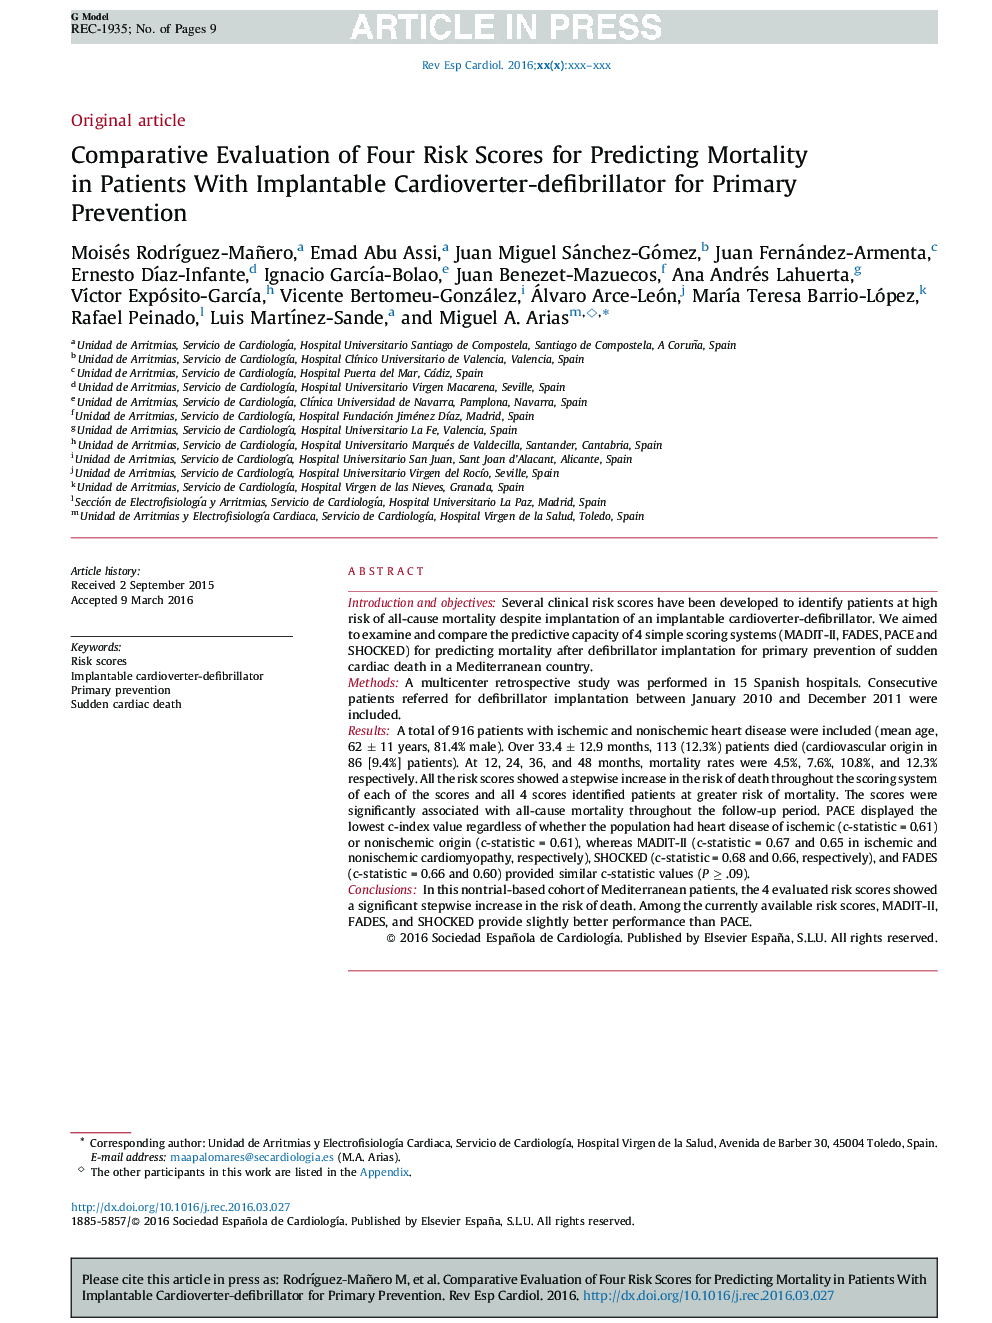 Comparative Evaluation of Four Risk Scores for Predicting Mortality in Patients With Implantable Cardioverter-defibrillator for Primary Prevention